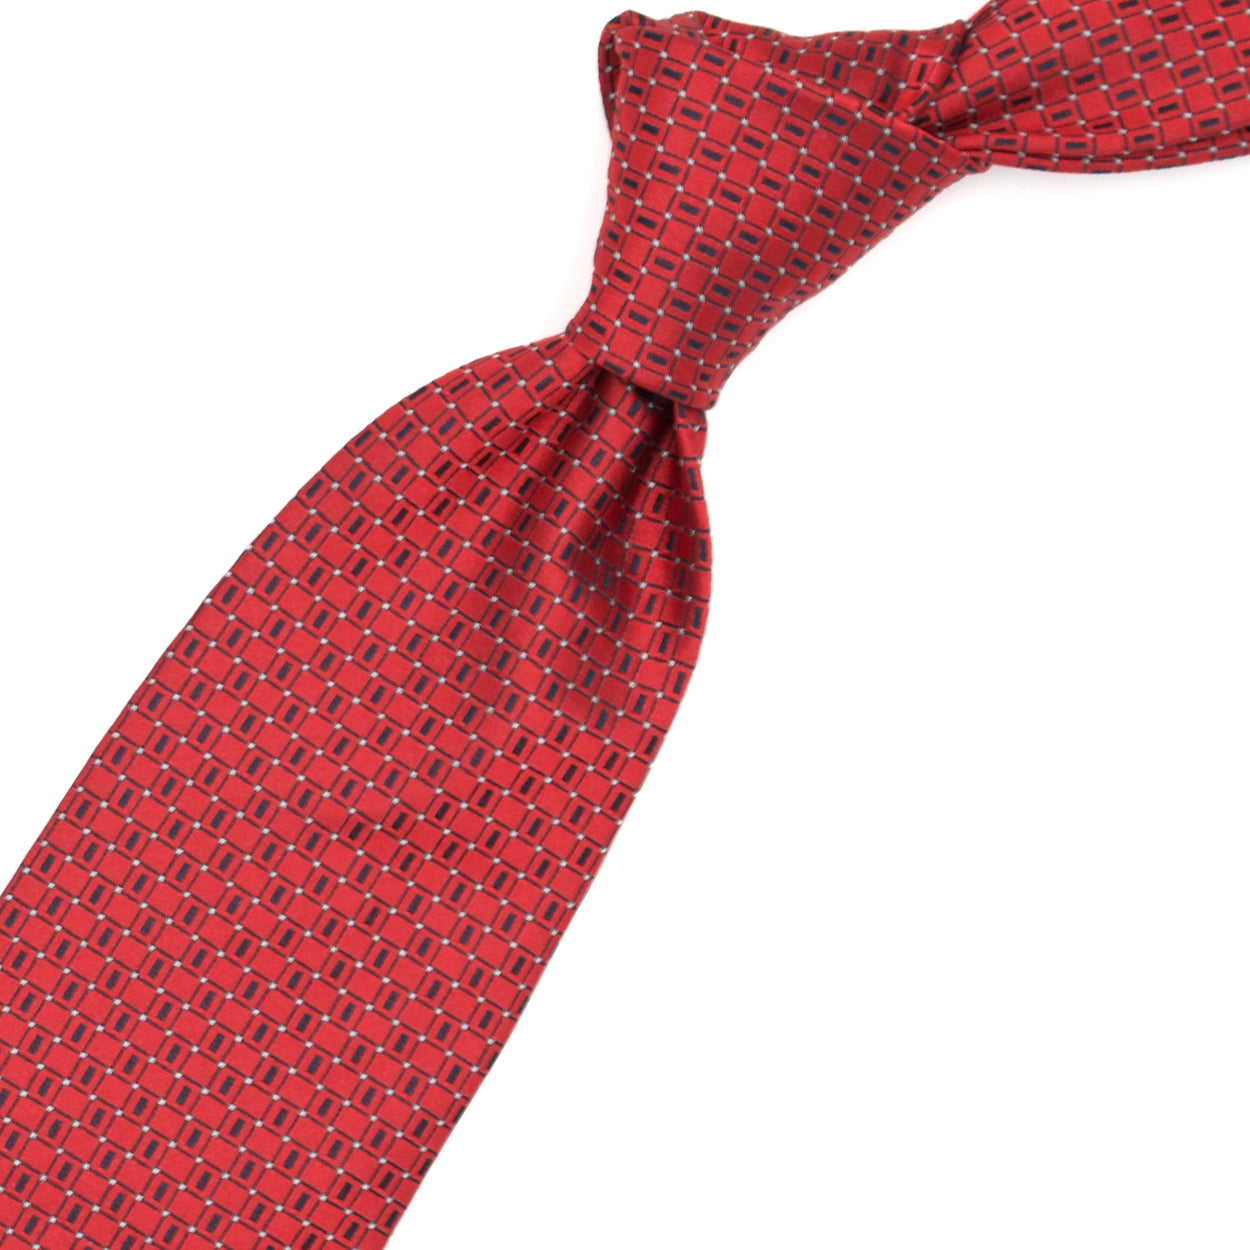 Red tie with black pattern and white dots